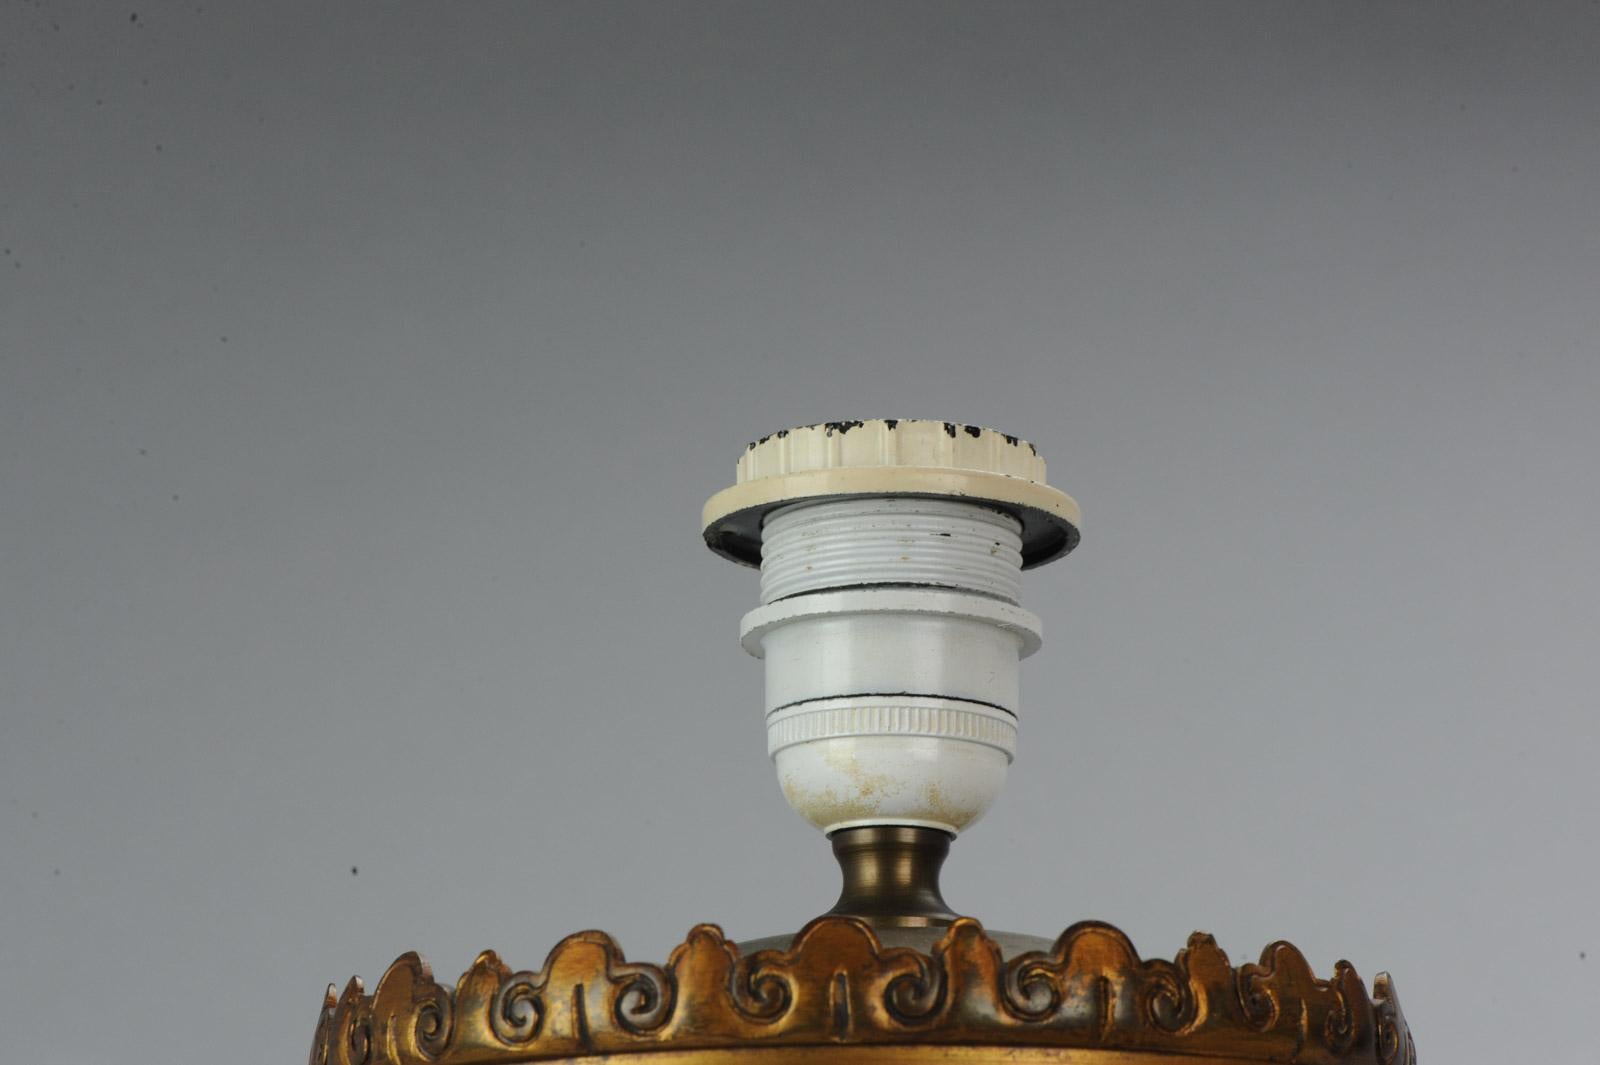 Lovely Antique Satsuma Lamp Vase Set with Cranes and Turtles, Japan 19th Century For Sale 5